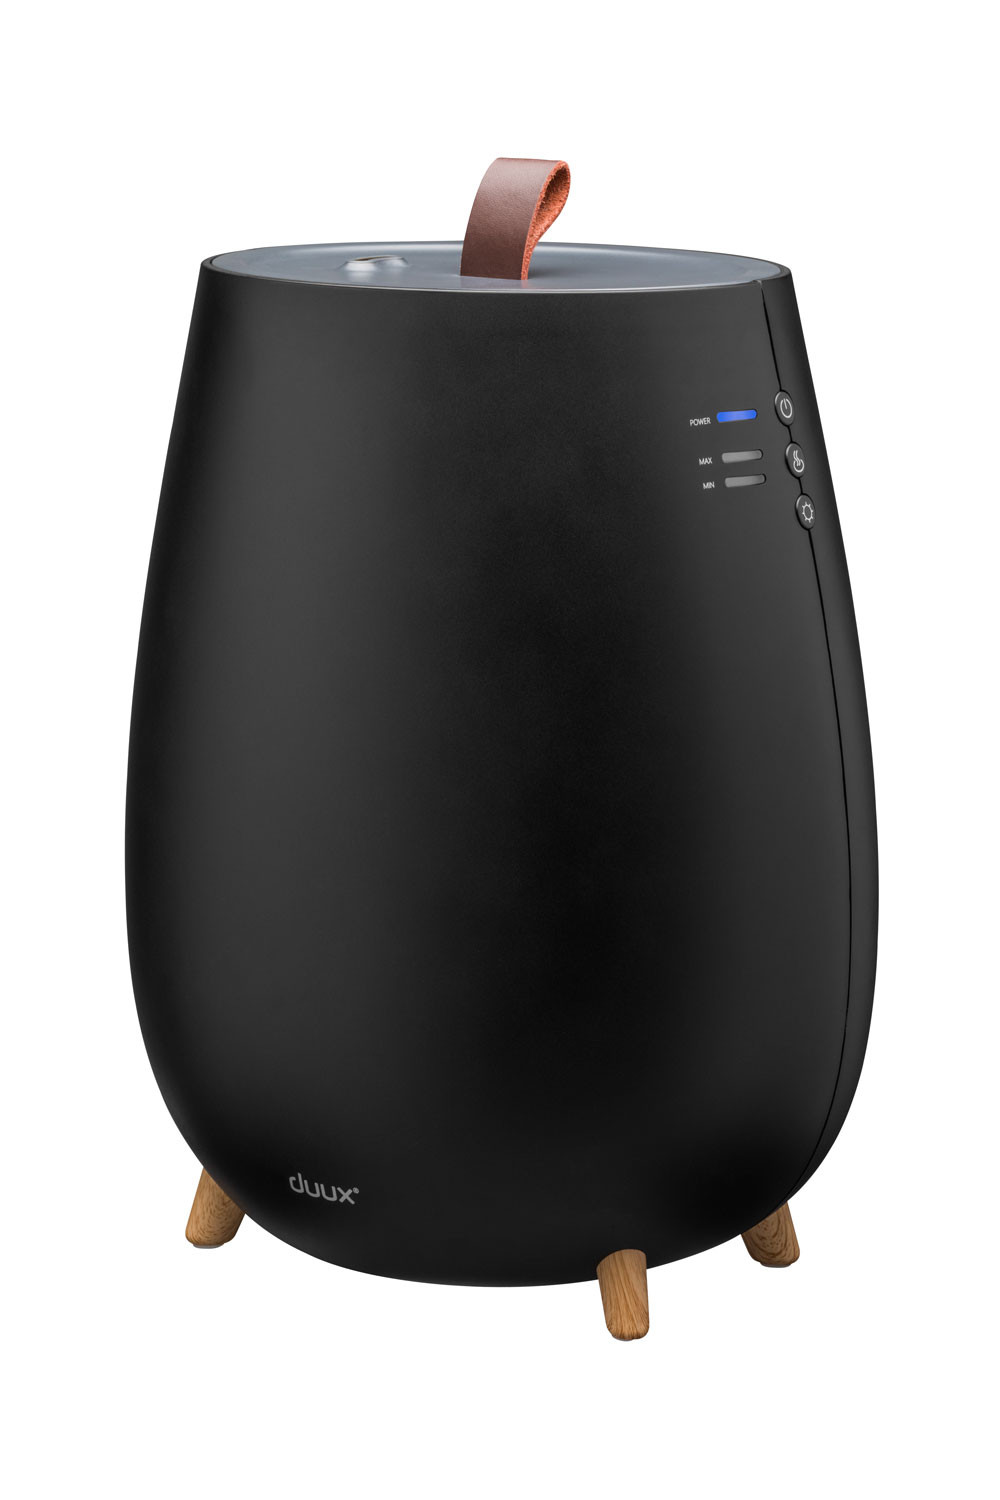 Duux Tag Ultrasonic Humidifier | Gen 2 featured image